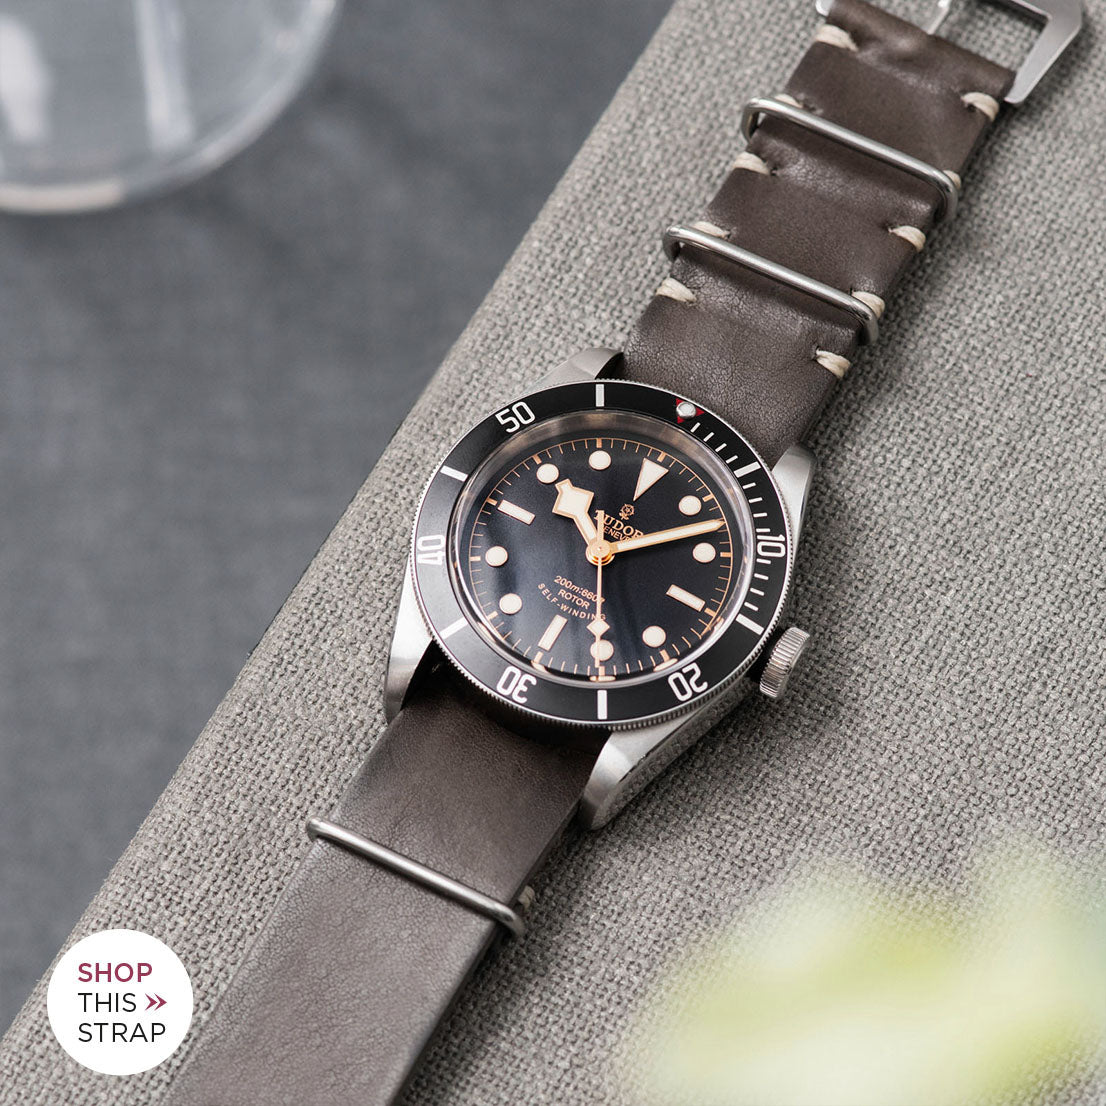 Bulang and Sons_Strap Guide_The Tudor Black Bay Black 79220N_Piombo Grey Nato Leather Watch Strap